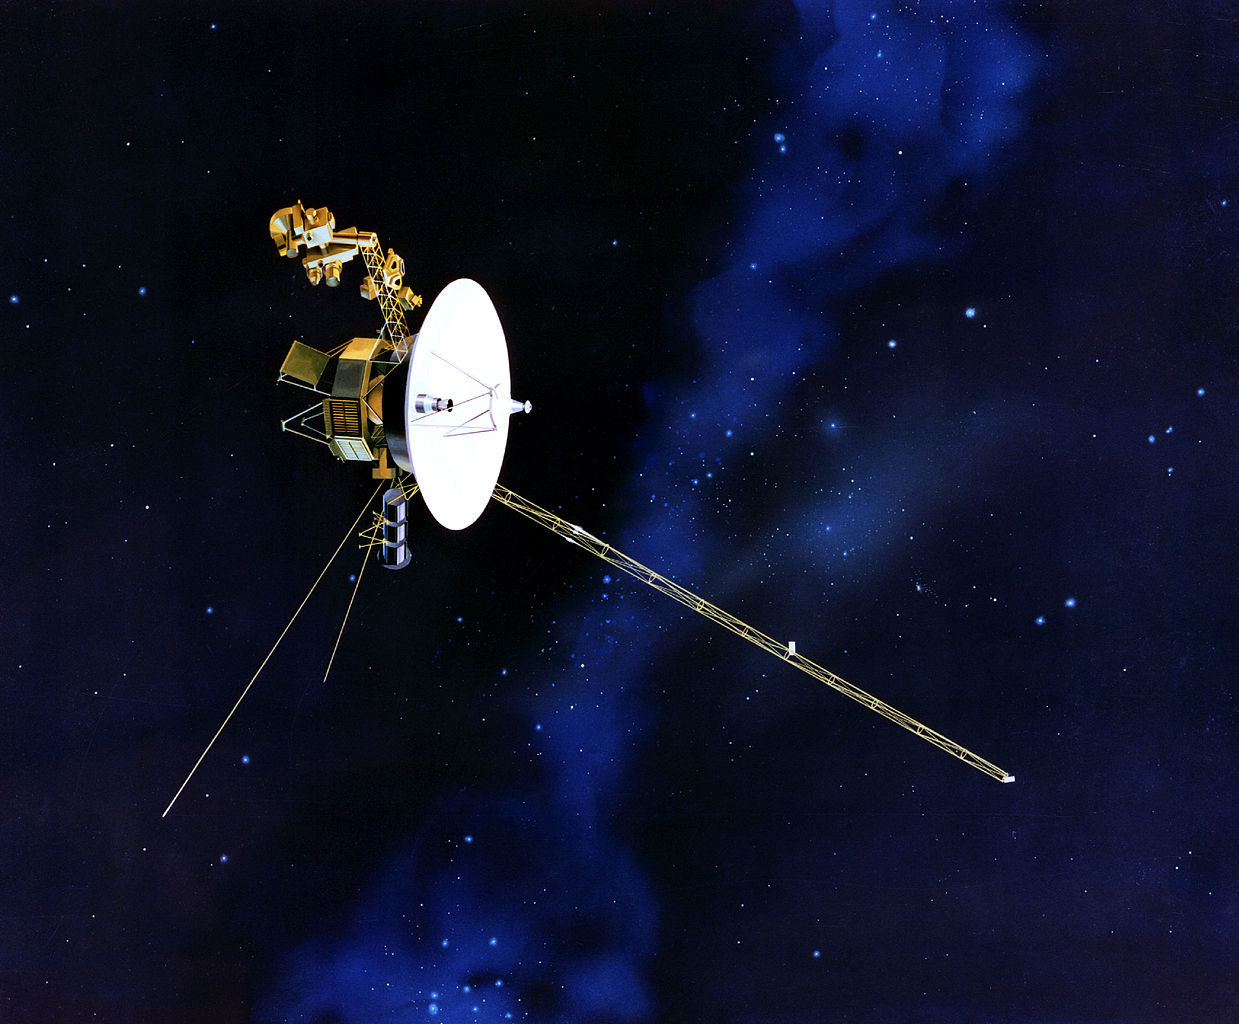 1977: Voyager 1 Probe Launched – Today’s Most Distant Human-Made Object from the Earth